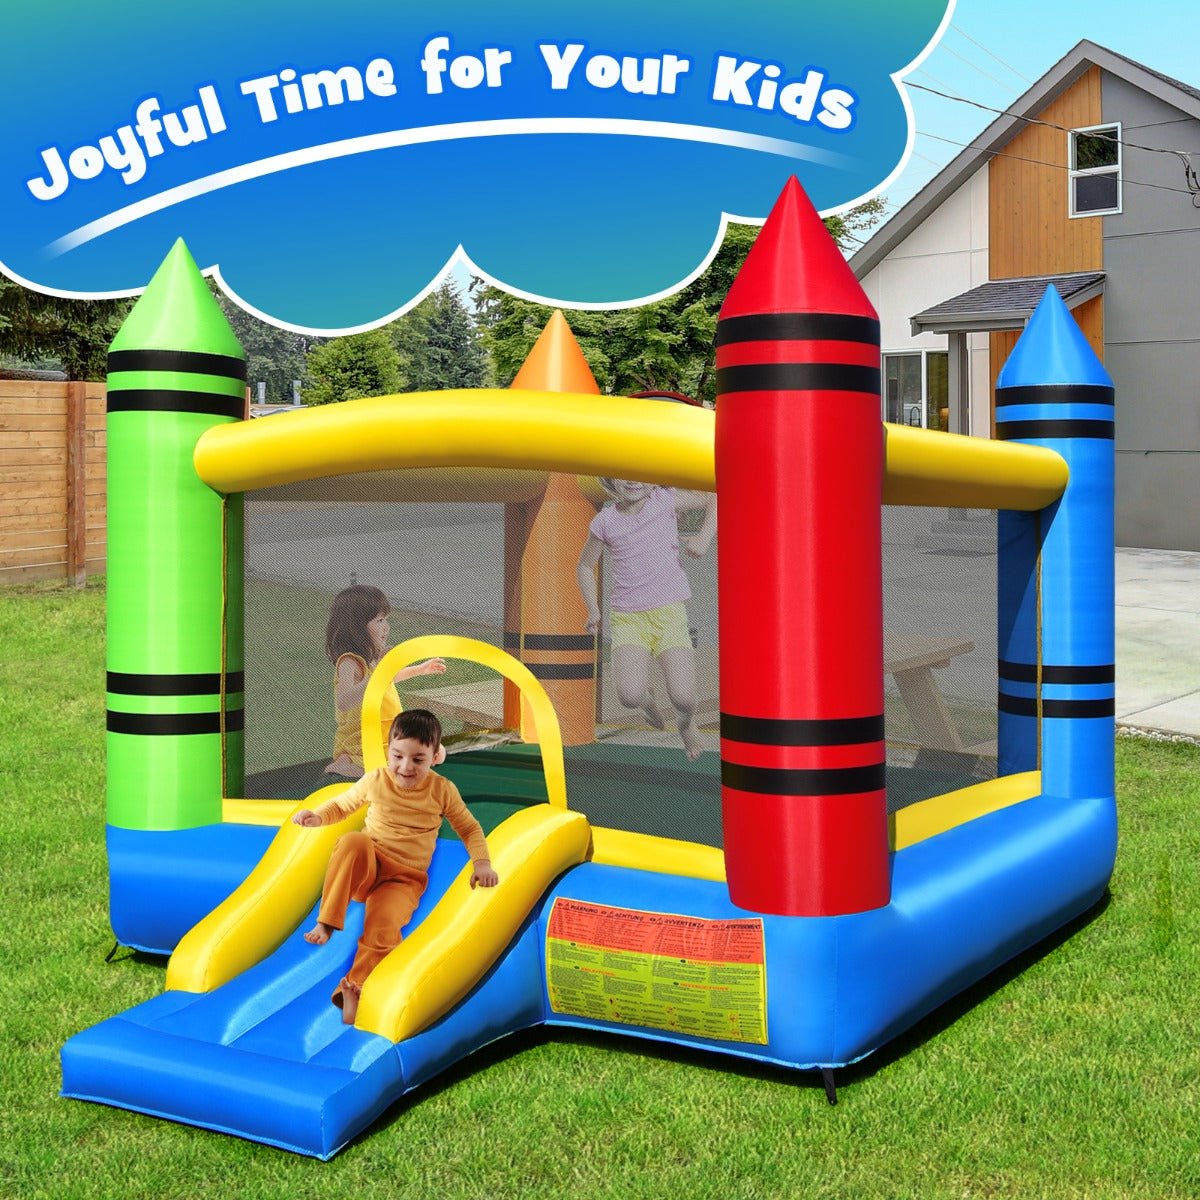 Kids Jumping Castle with Slide - Safe and Joyful Outdoor Bouncing